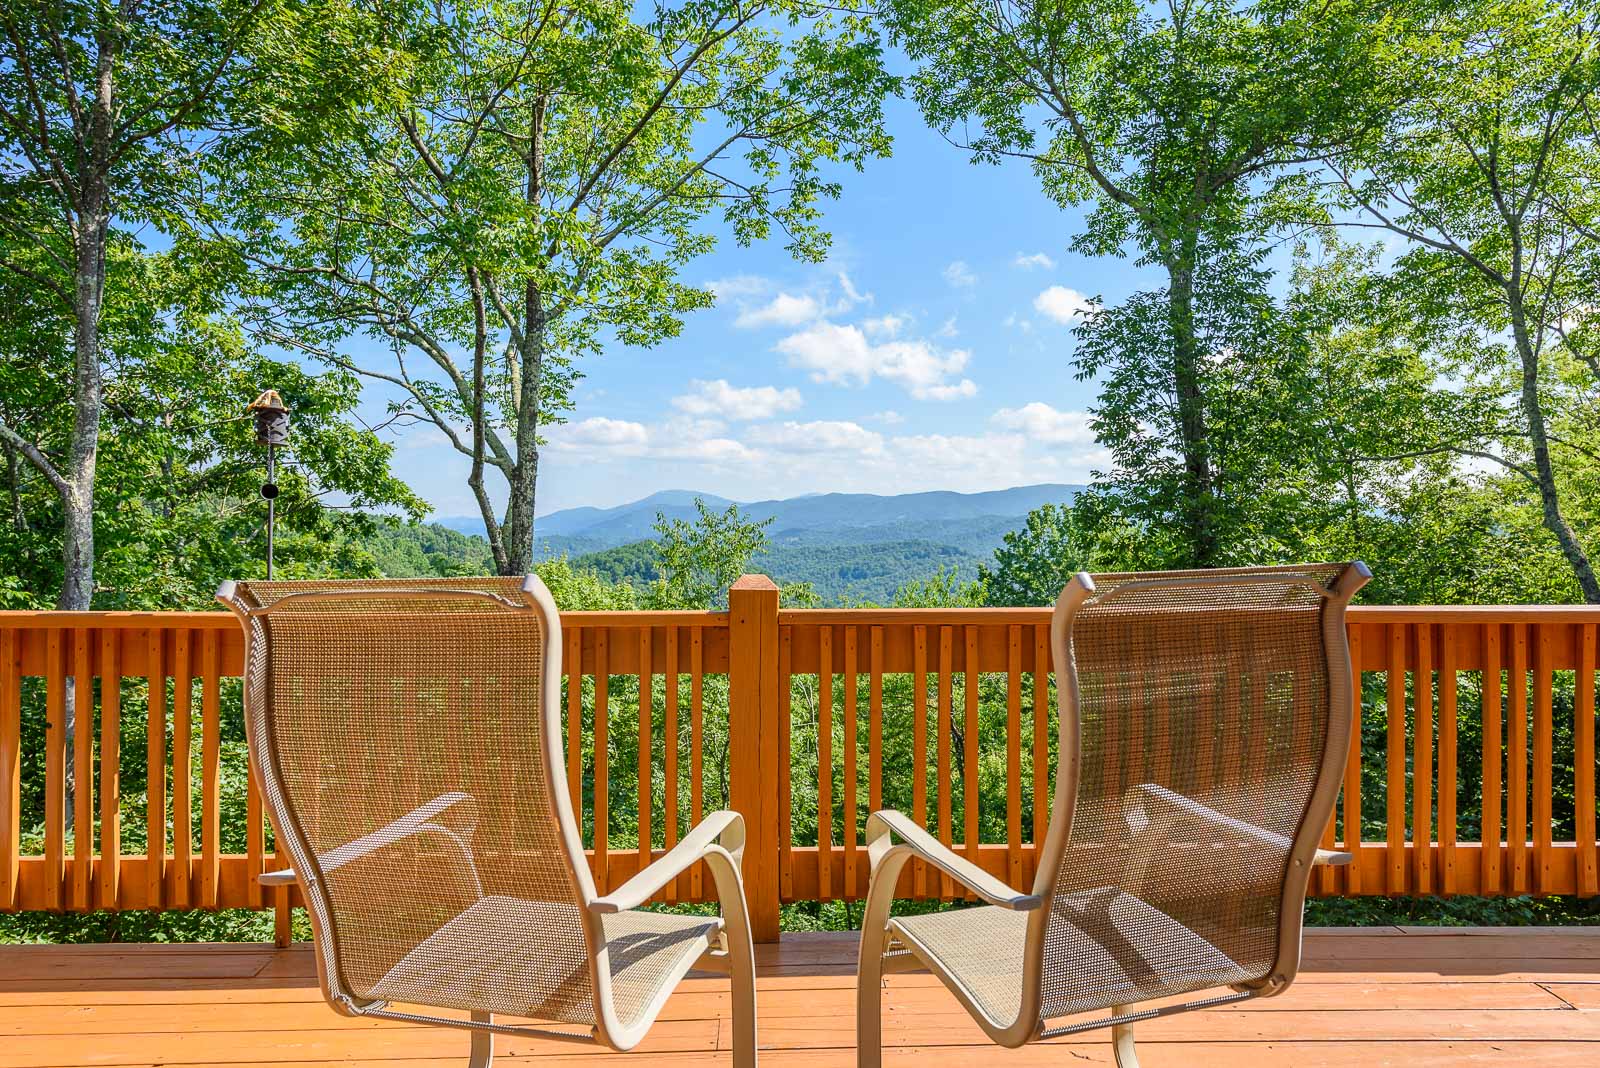 Enjoy the View at Valle Crucis Overlook from the Back Porch